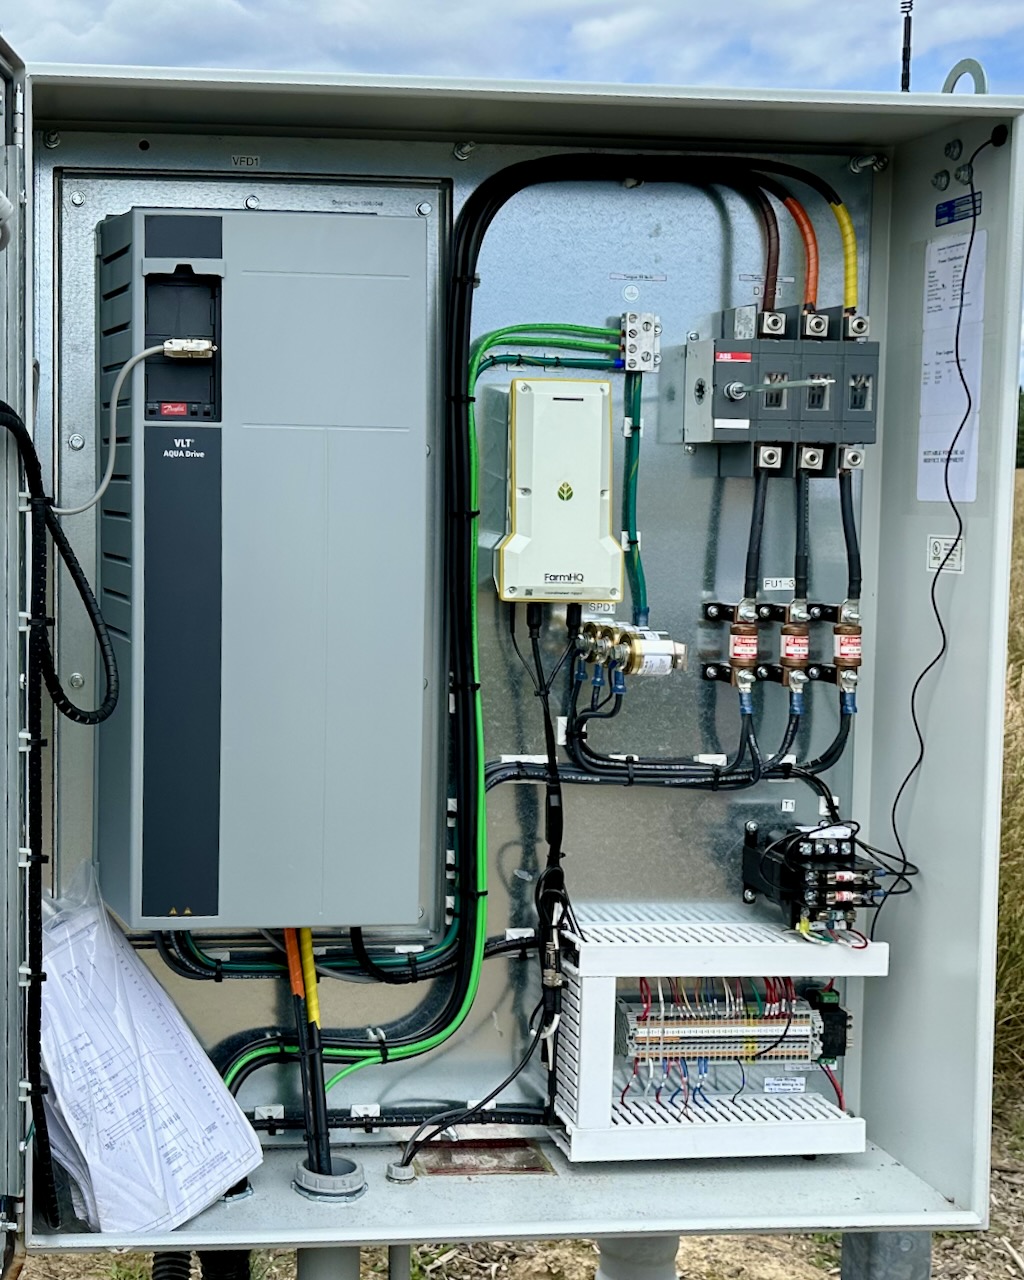 FarmHQ TC-3 device wired into an electric pump panel with a Variable Frequency Drive (VFD)